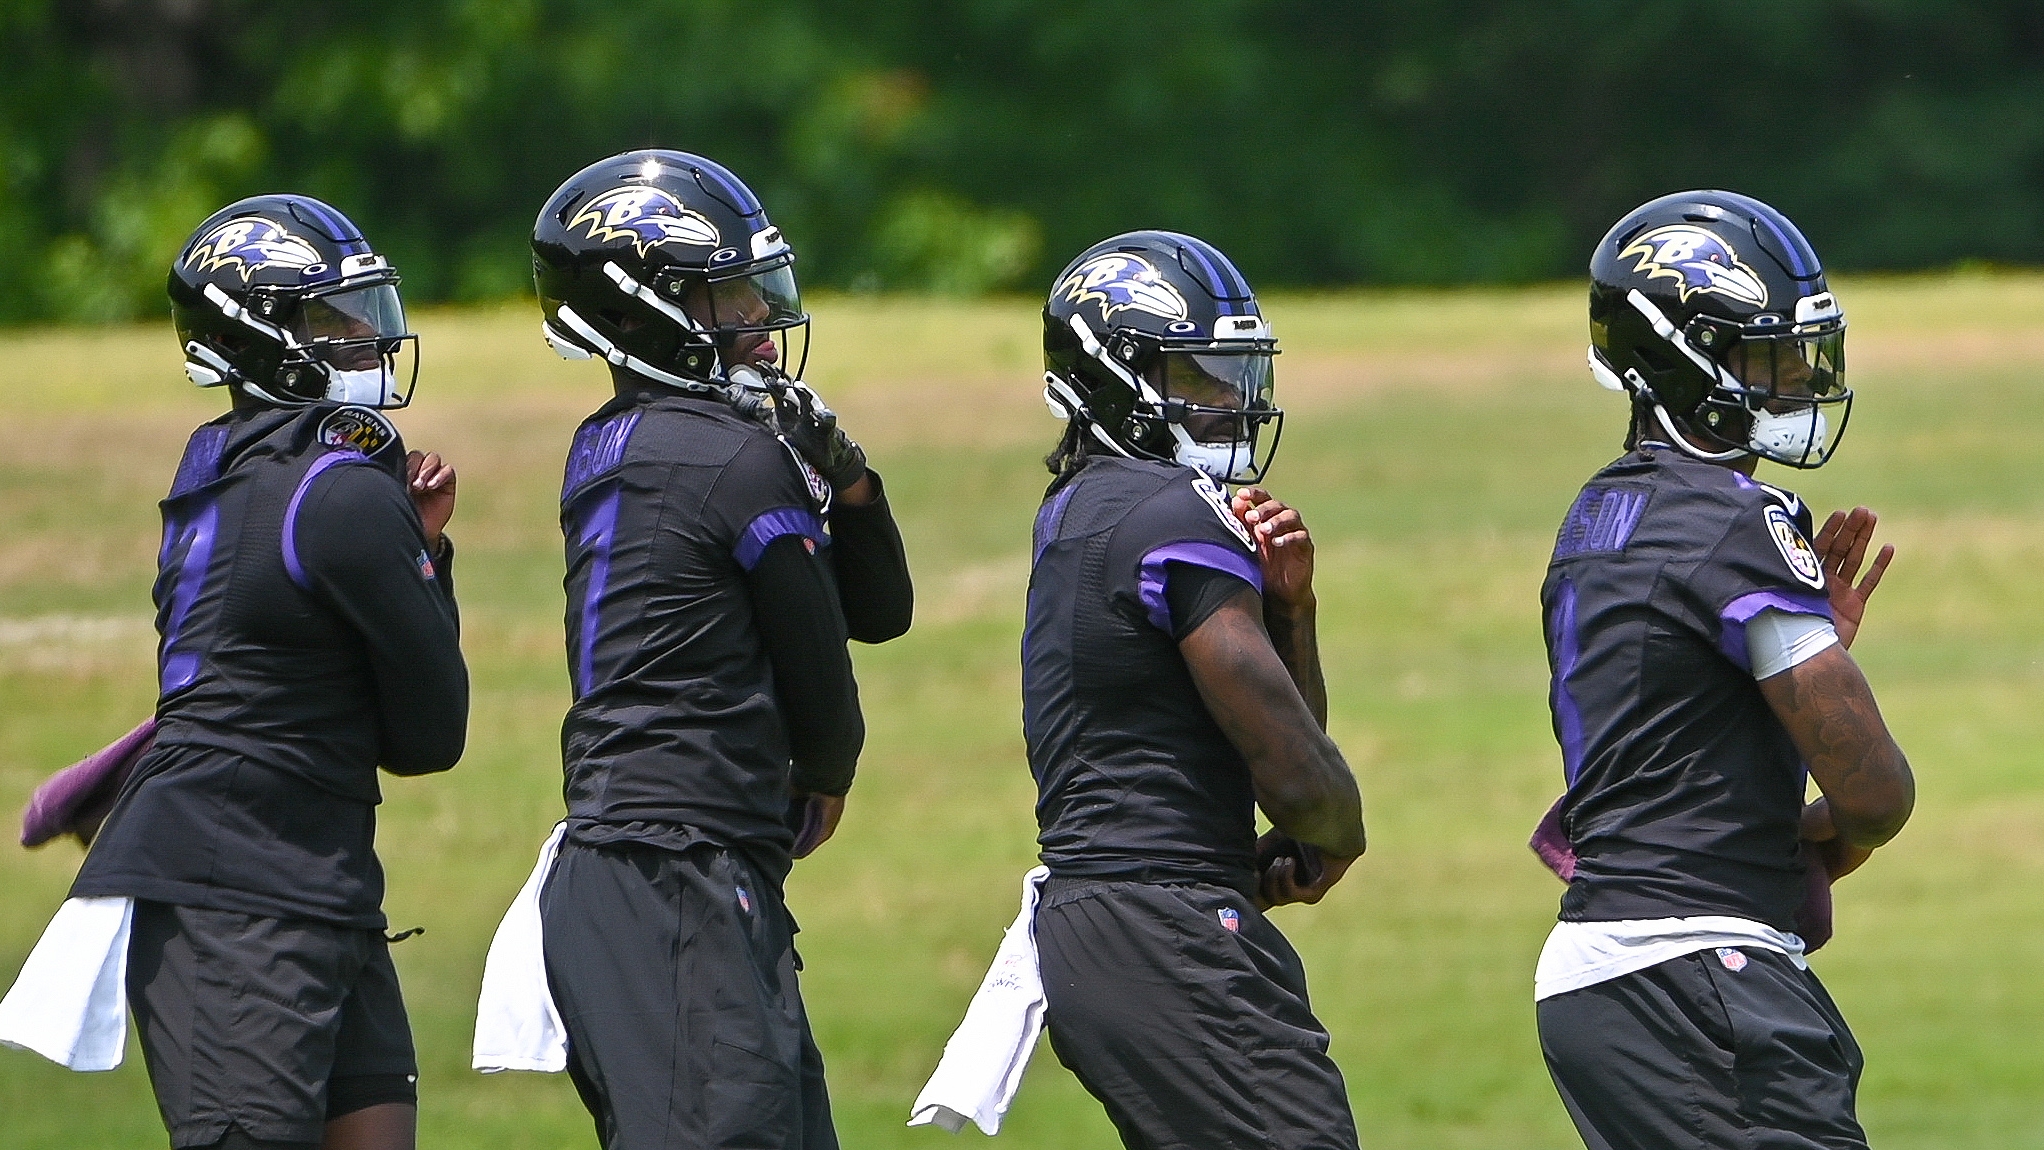 Ravens continue shaping roster with practice squad additions while